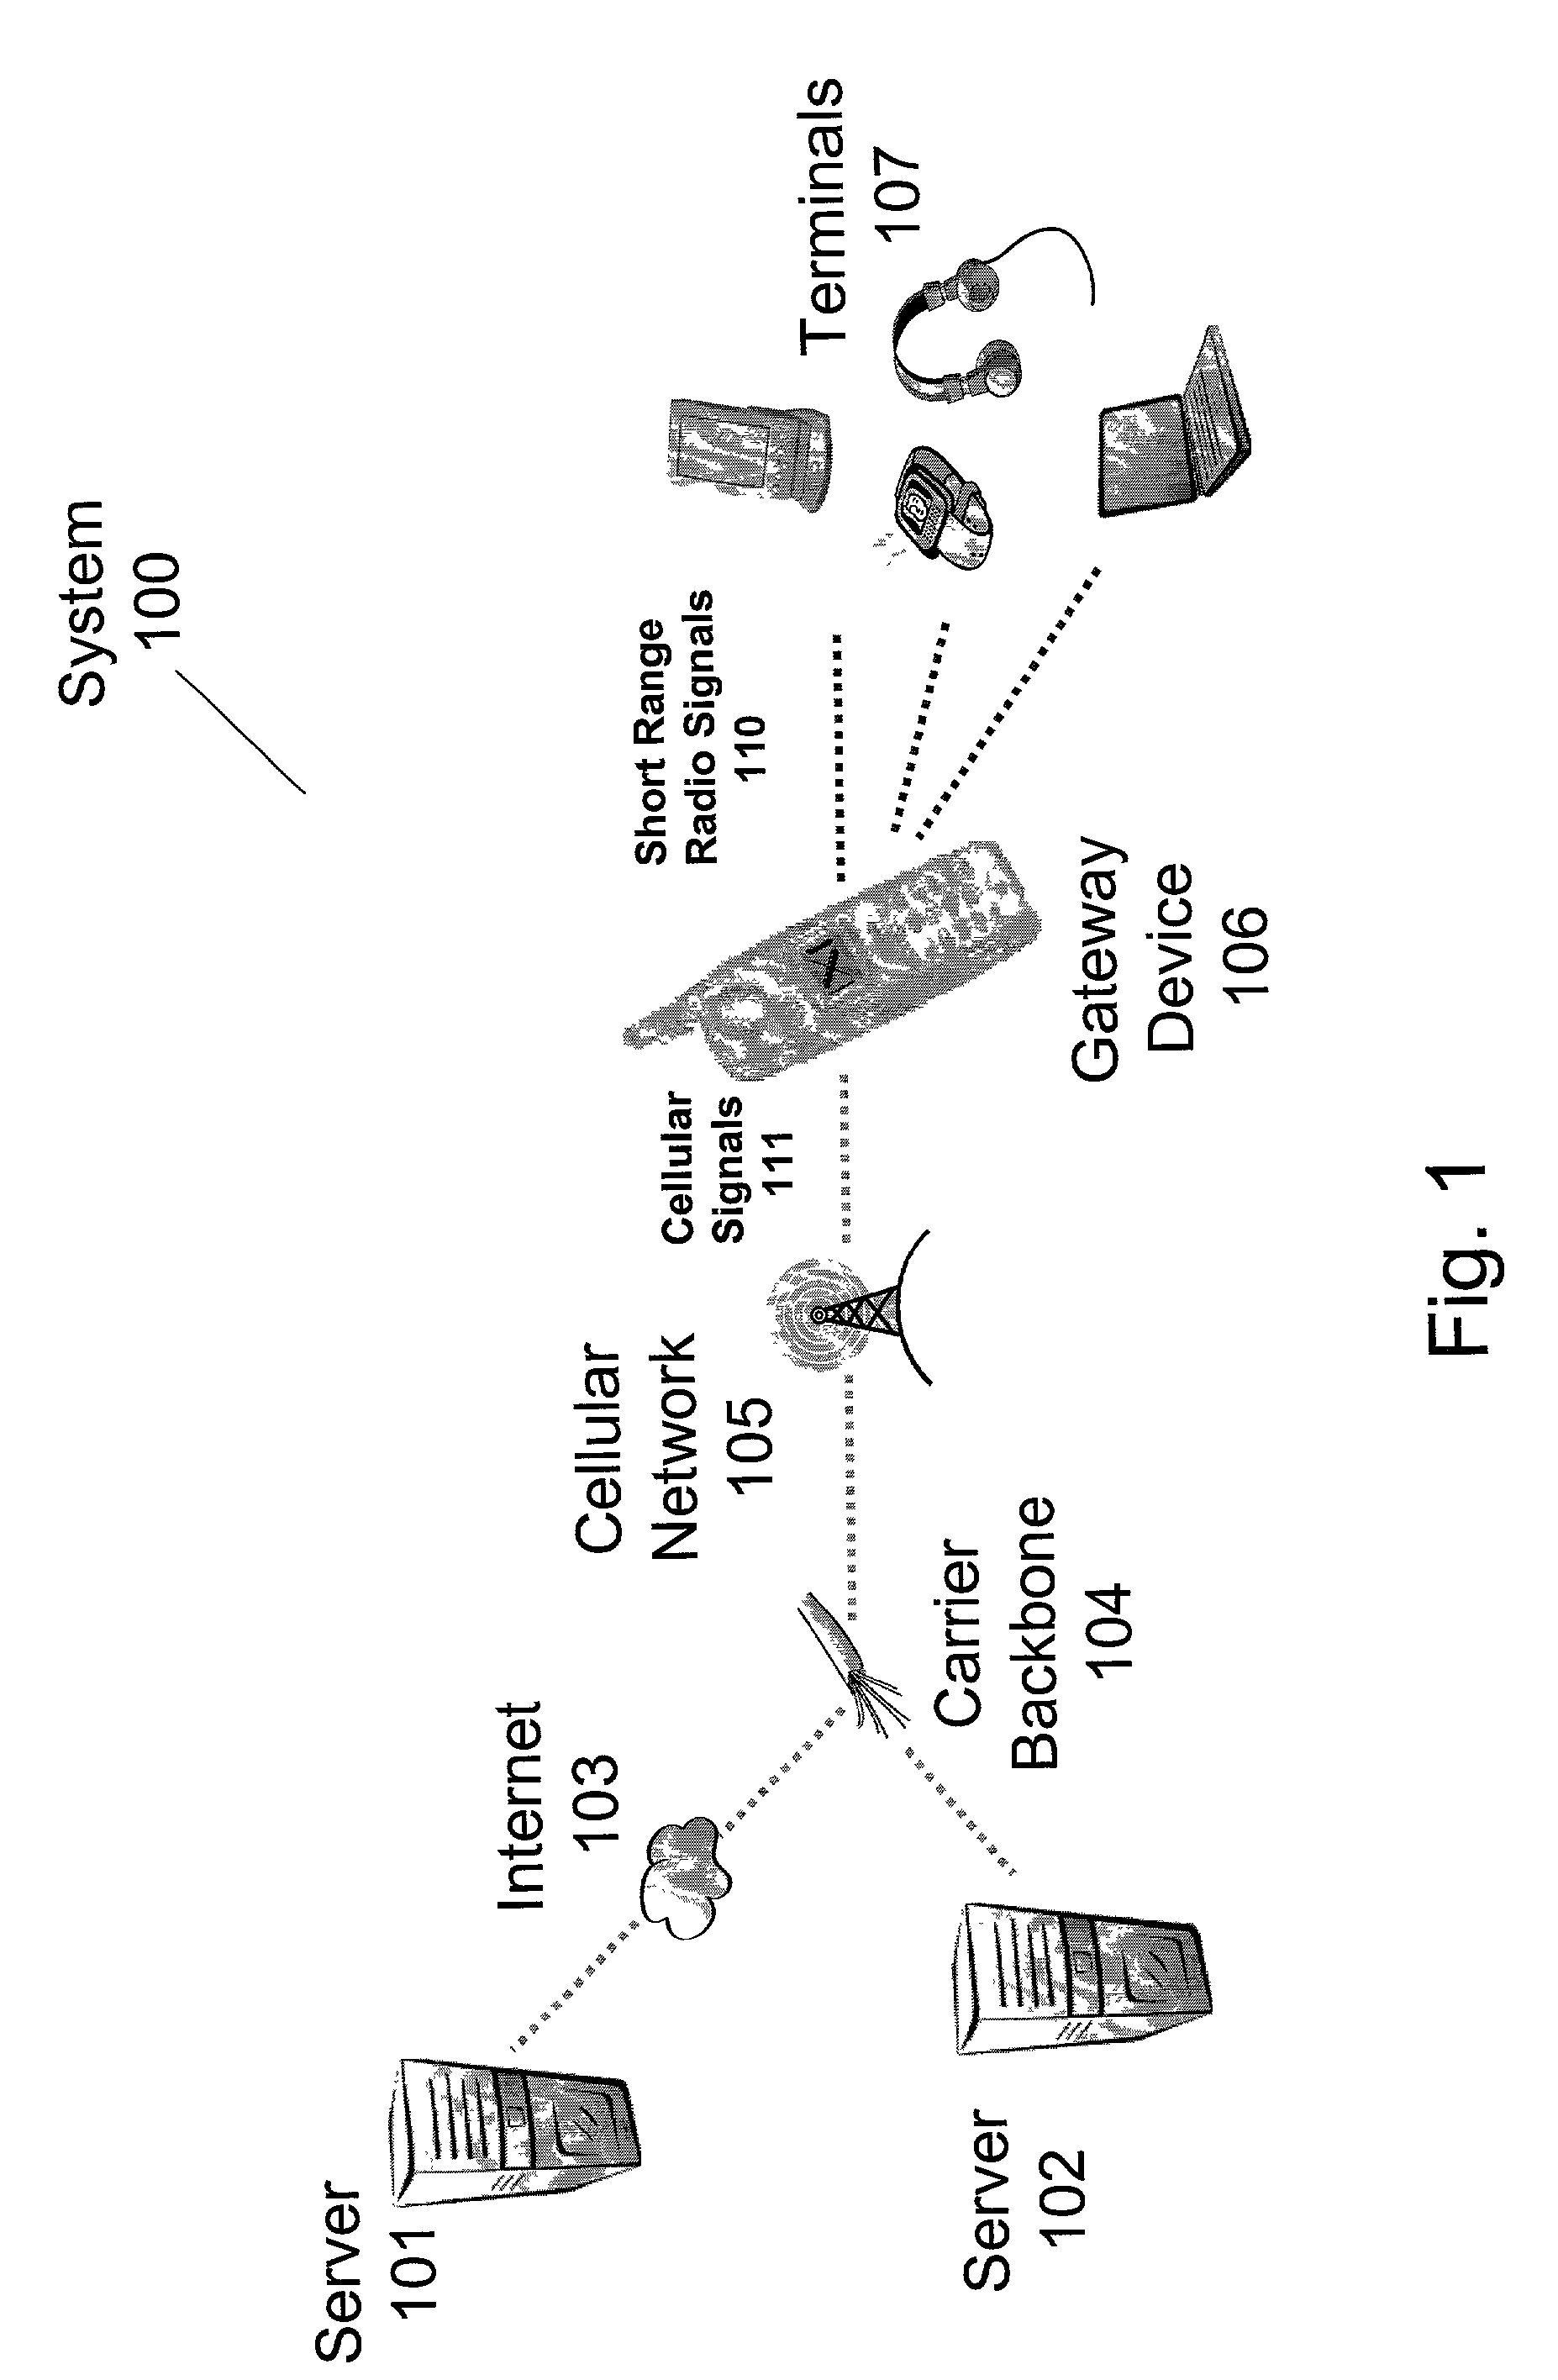 System, device and computer readable medium for providing a managed wireless network using short-range radio signals